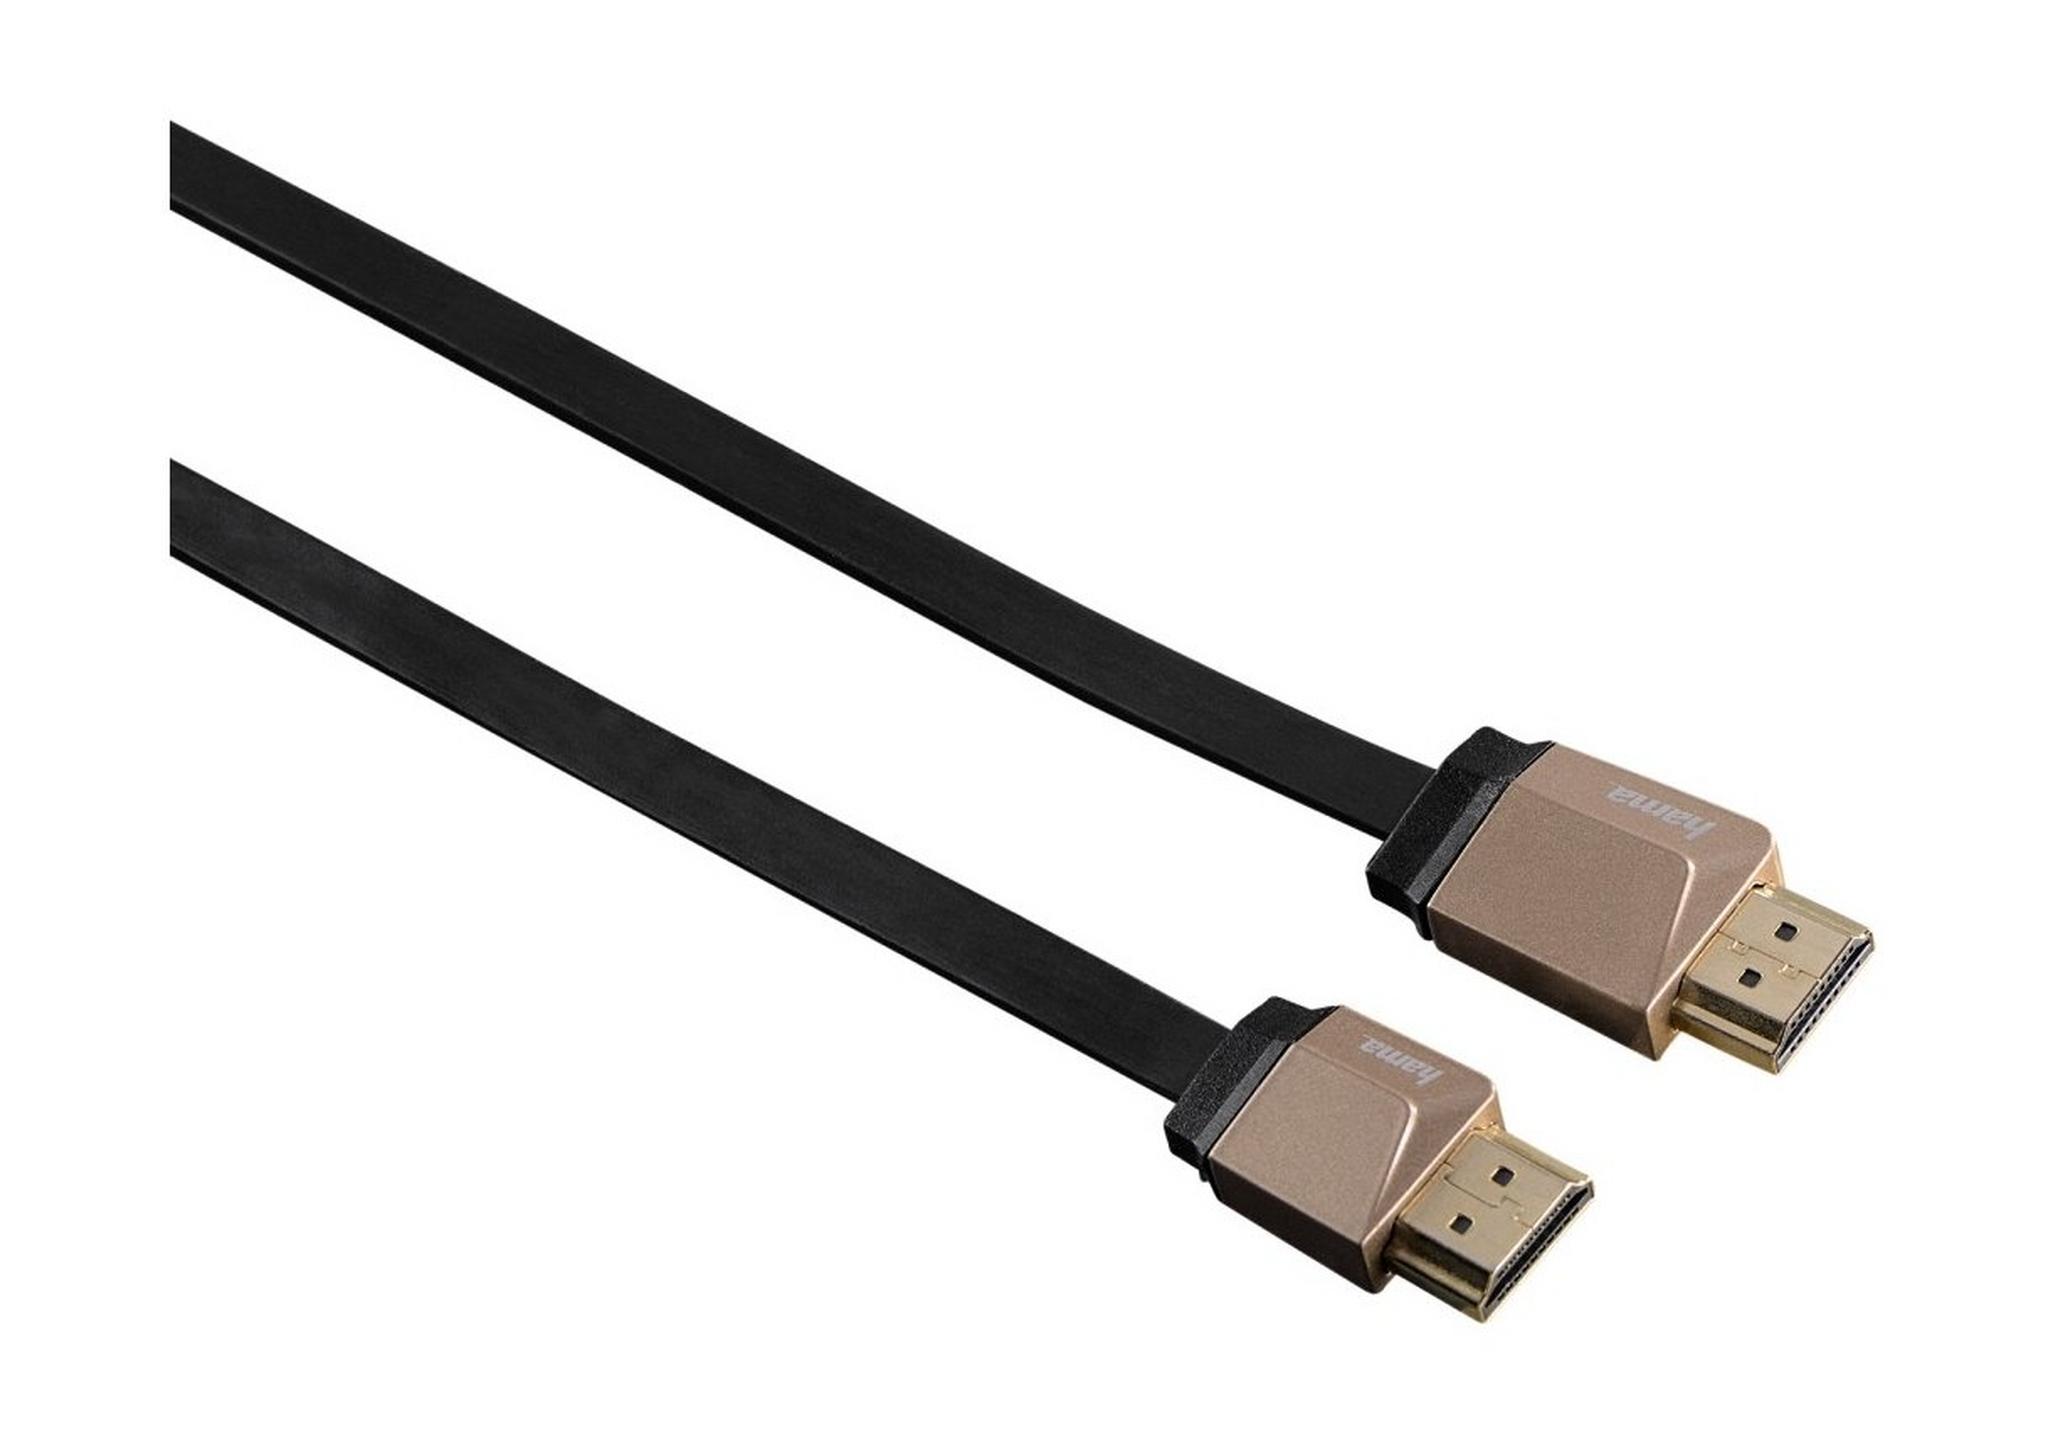 Hama 4K HDMI Cable With Ethernet - 1.5 Meters